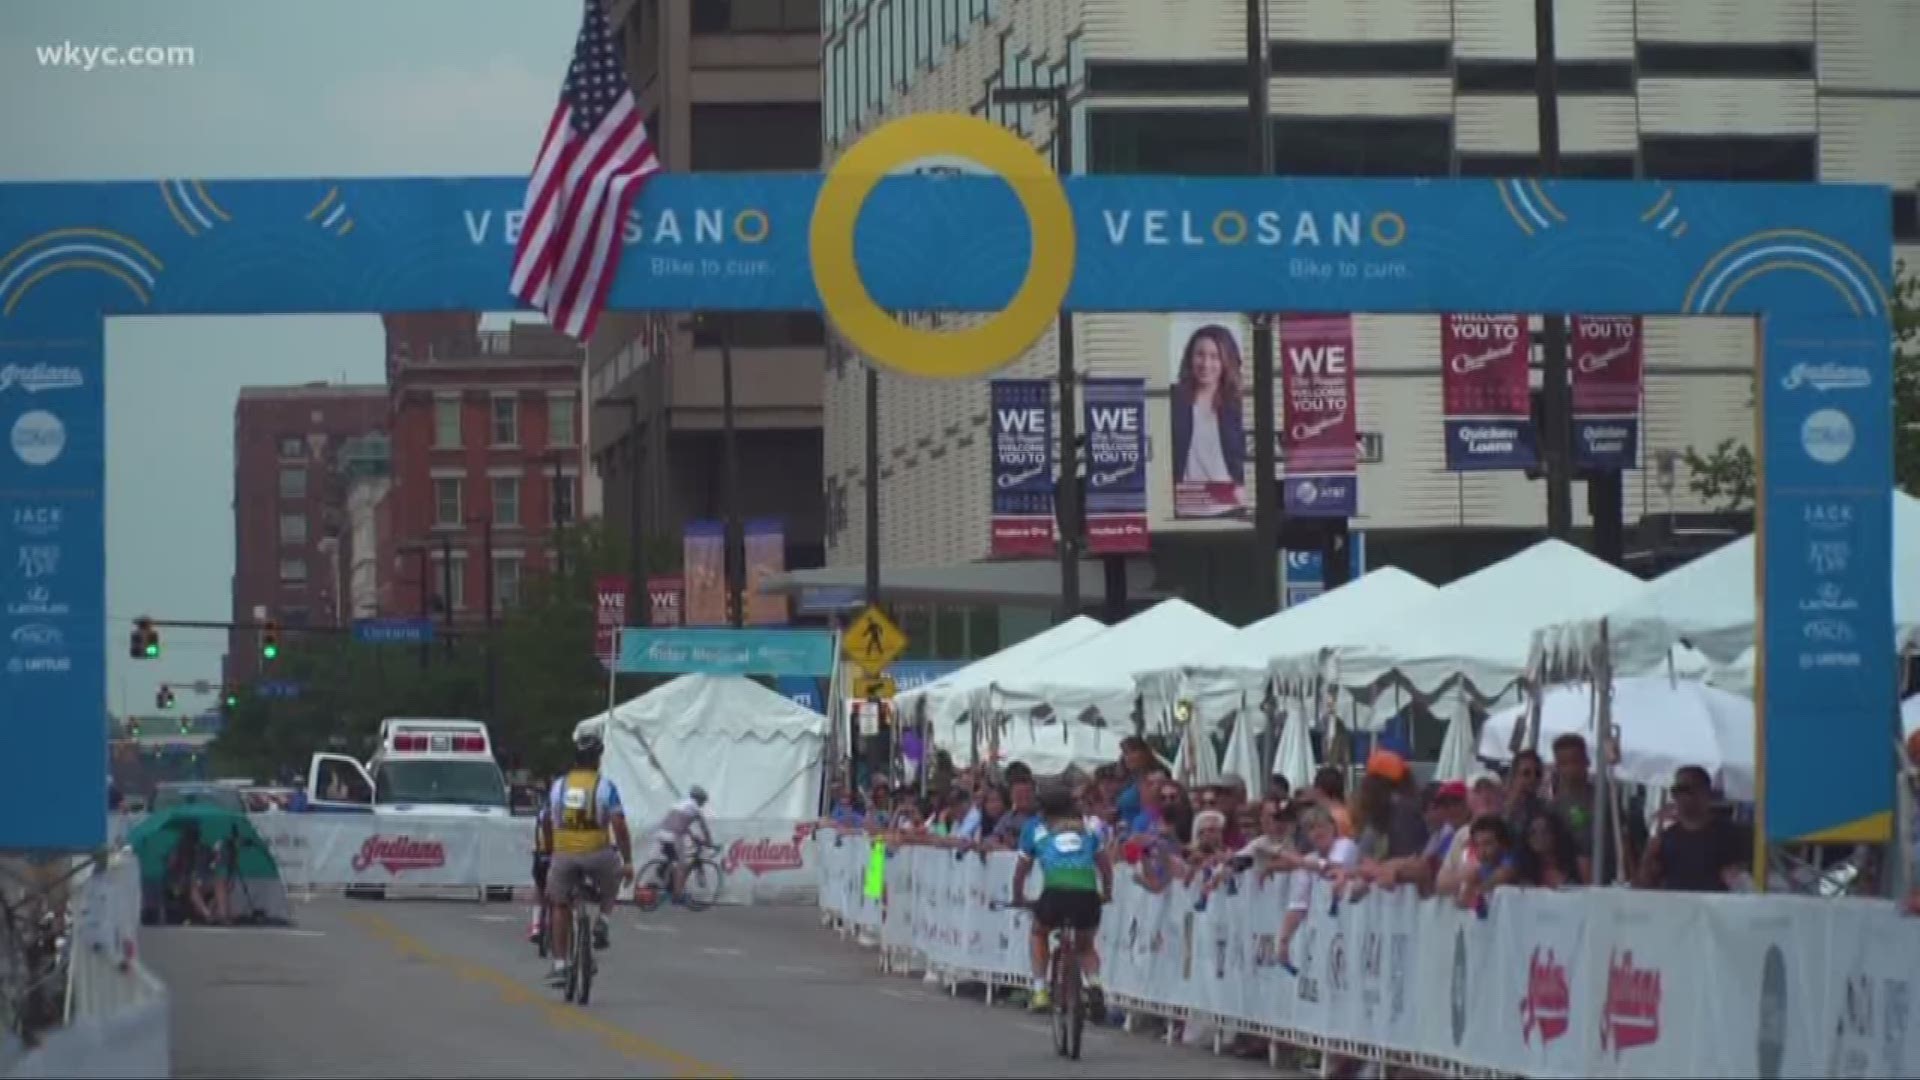 July 20, 2018: Here's how the VeloSano race event is helping fund cancer research in Cleveland.